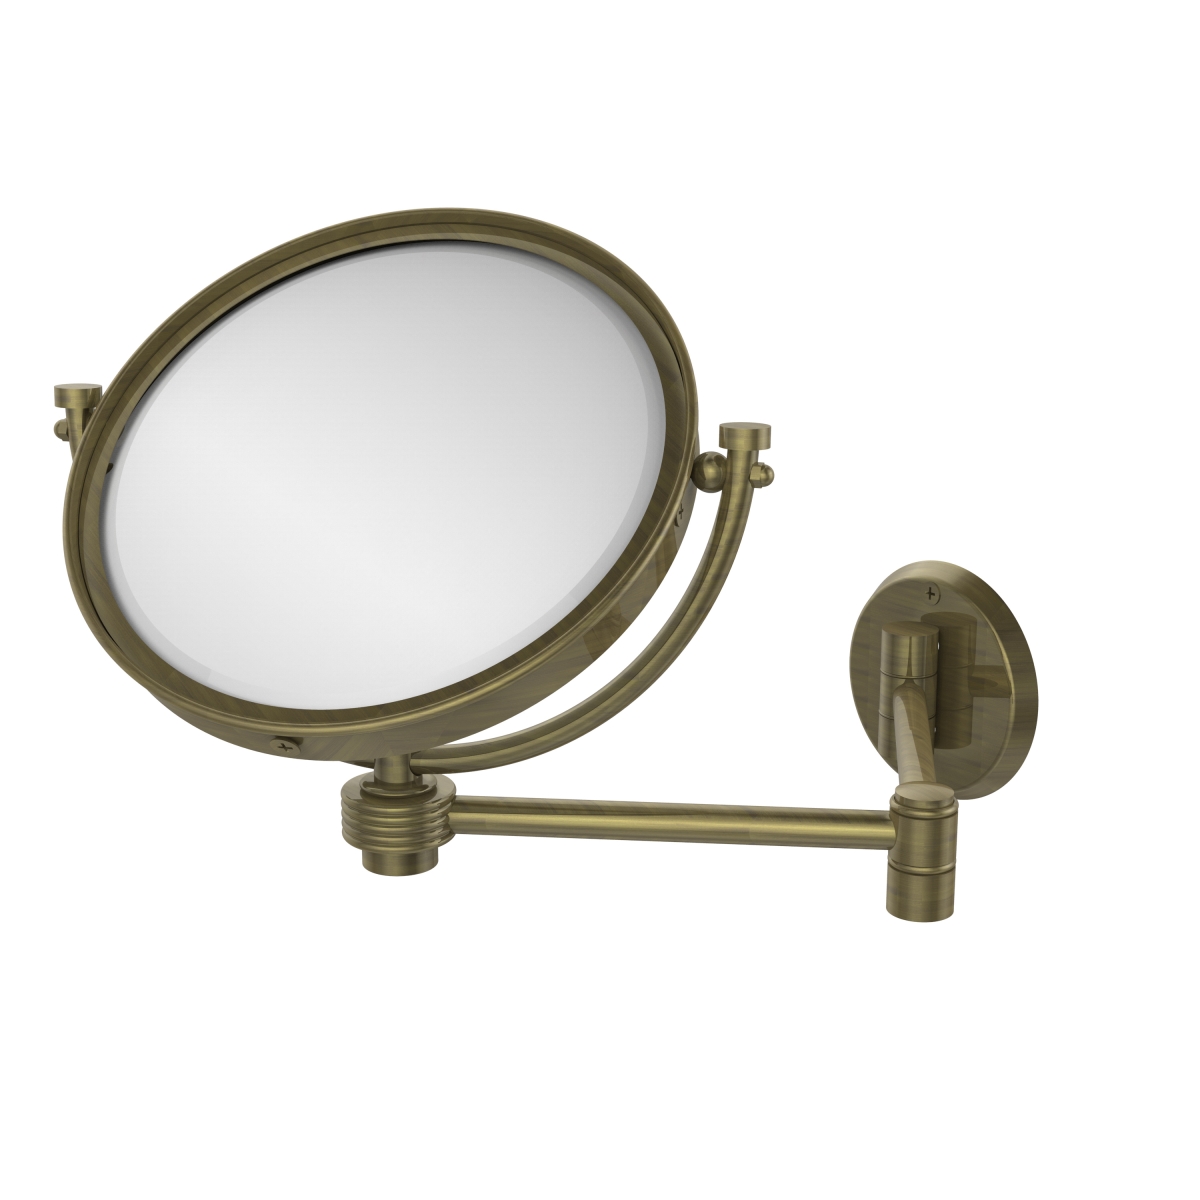 WM-6G-4X-ABR 8 in. Wall Mounted Extending Make-Up Mirror 4X Magnification with Groovy Accent, Antique Brass -  Allied Brass, WM-6G/4X-ABR